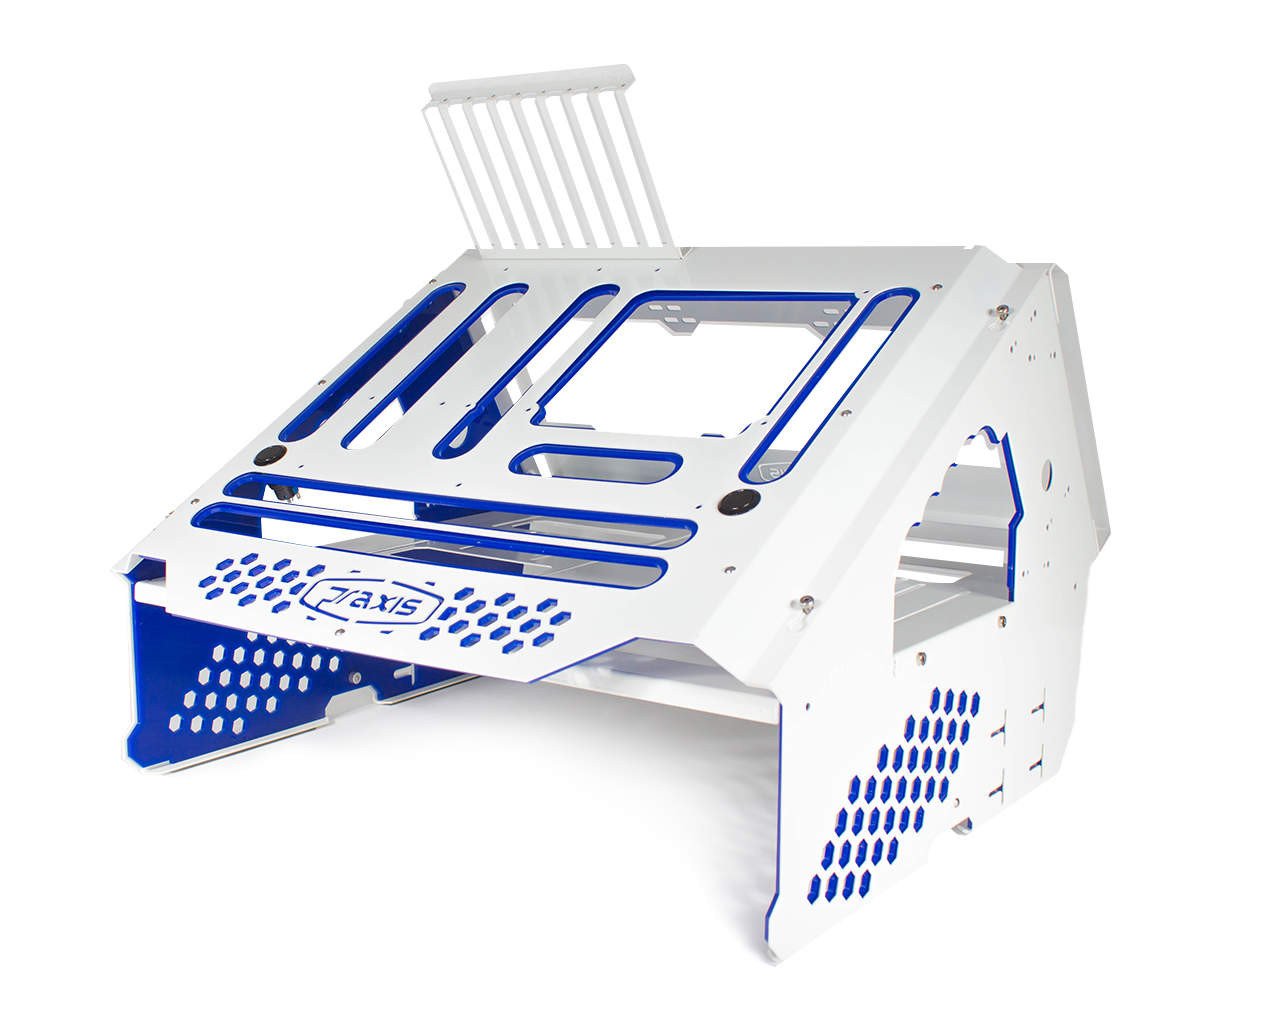 Praxis WetBench - PrimoChill - KEEPING IT COOL White w/Solid Blue Accents